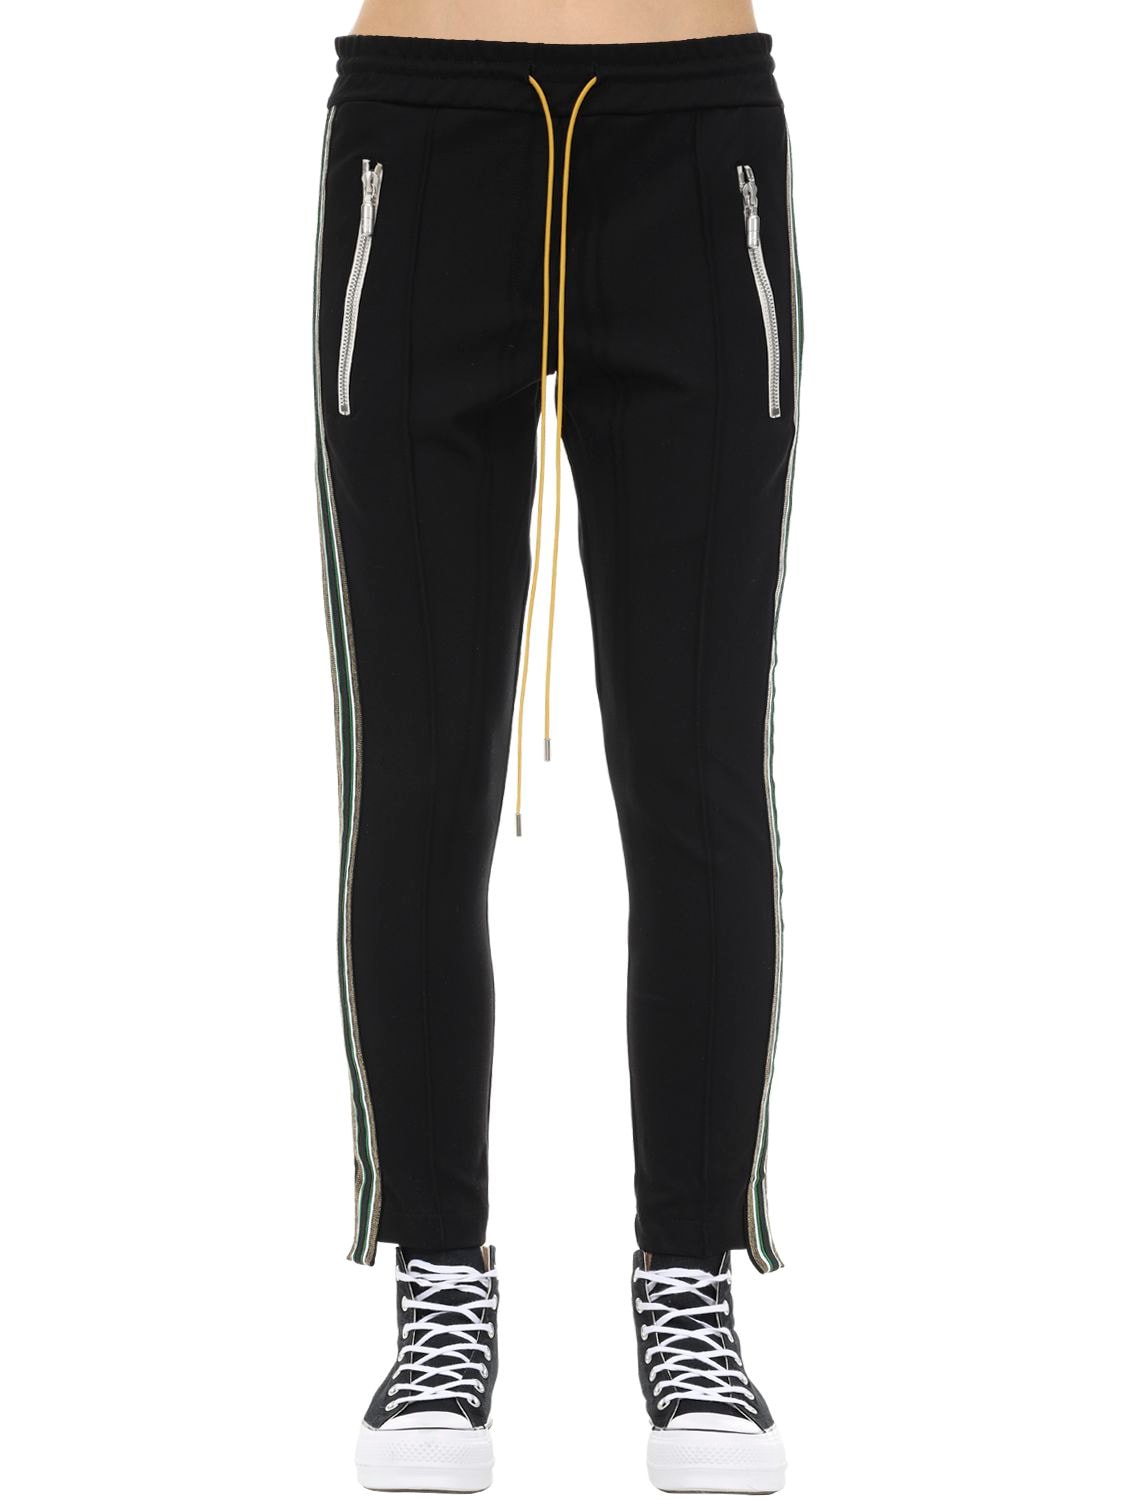 Rhude Traxedo Pants W/ Contrasting Side Bands In Black